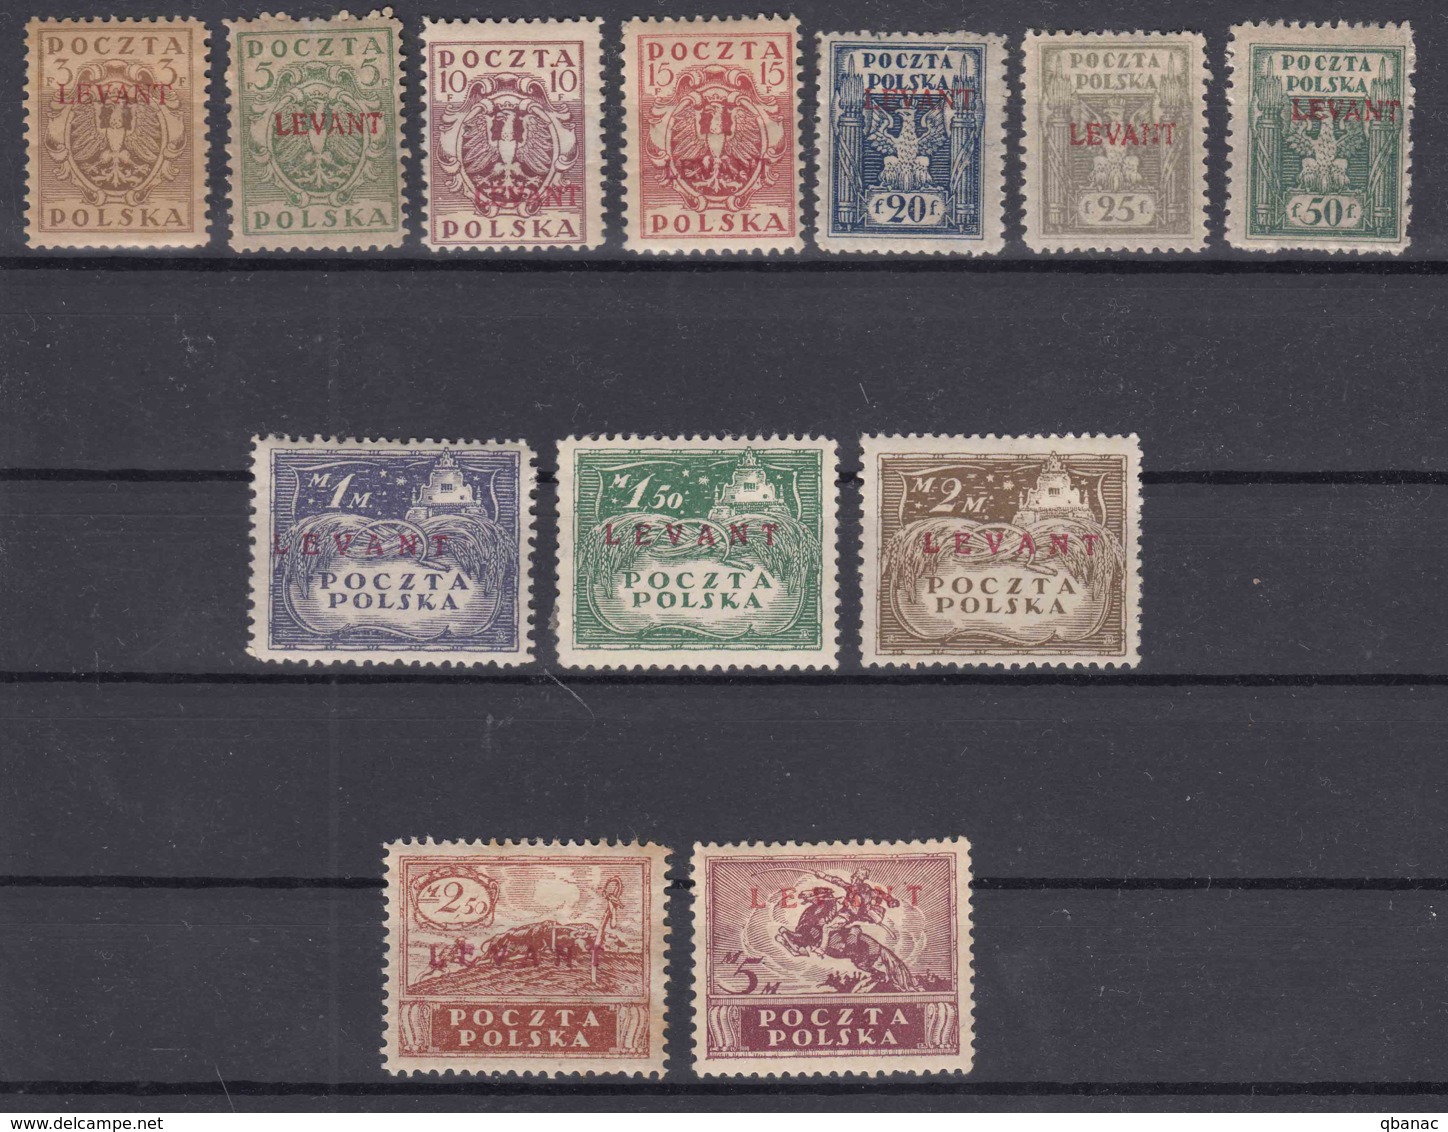 Poland Post Offices In Levant (Turkey) 1919 Mi#1-12 Mint Hinged Complete Set - Levant (Turquía)